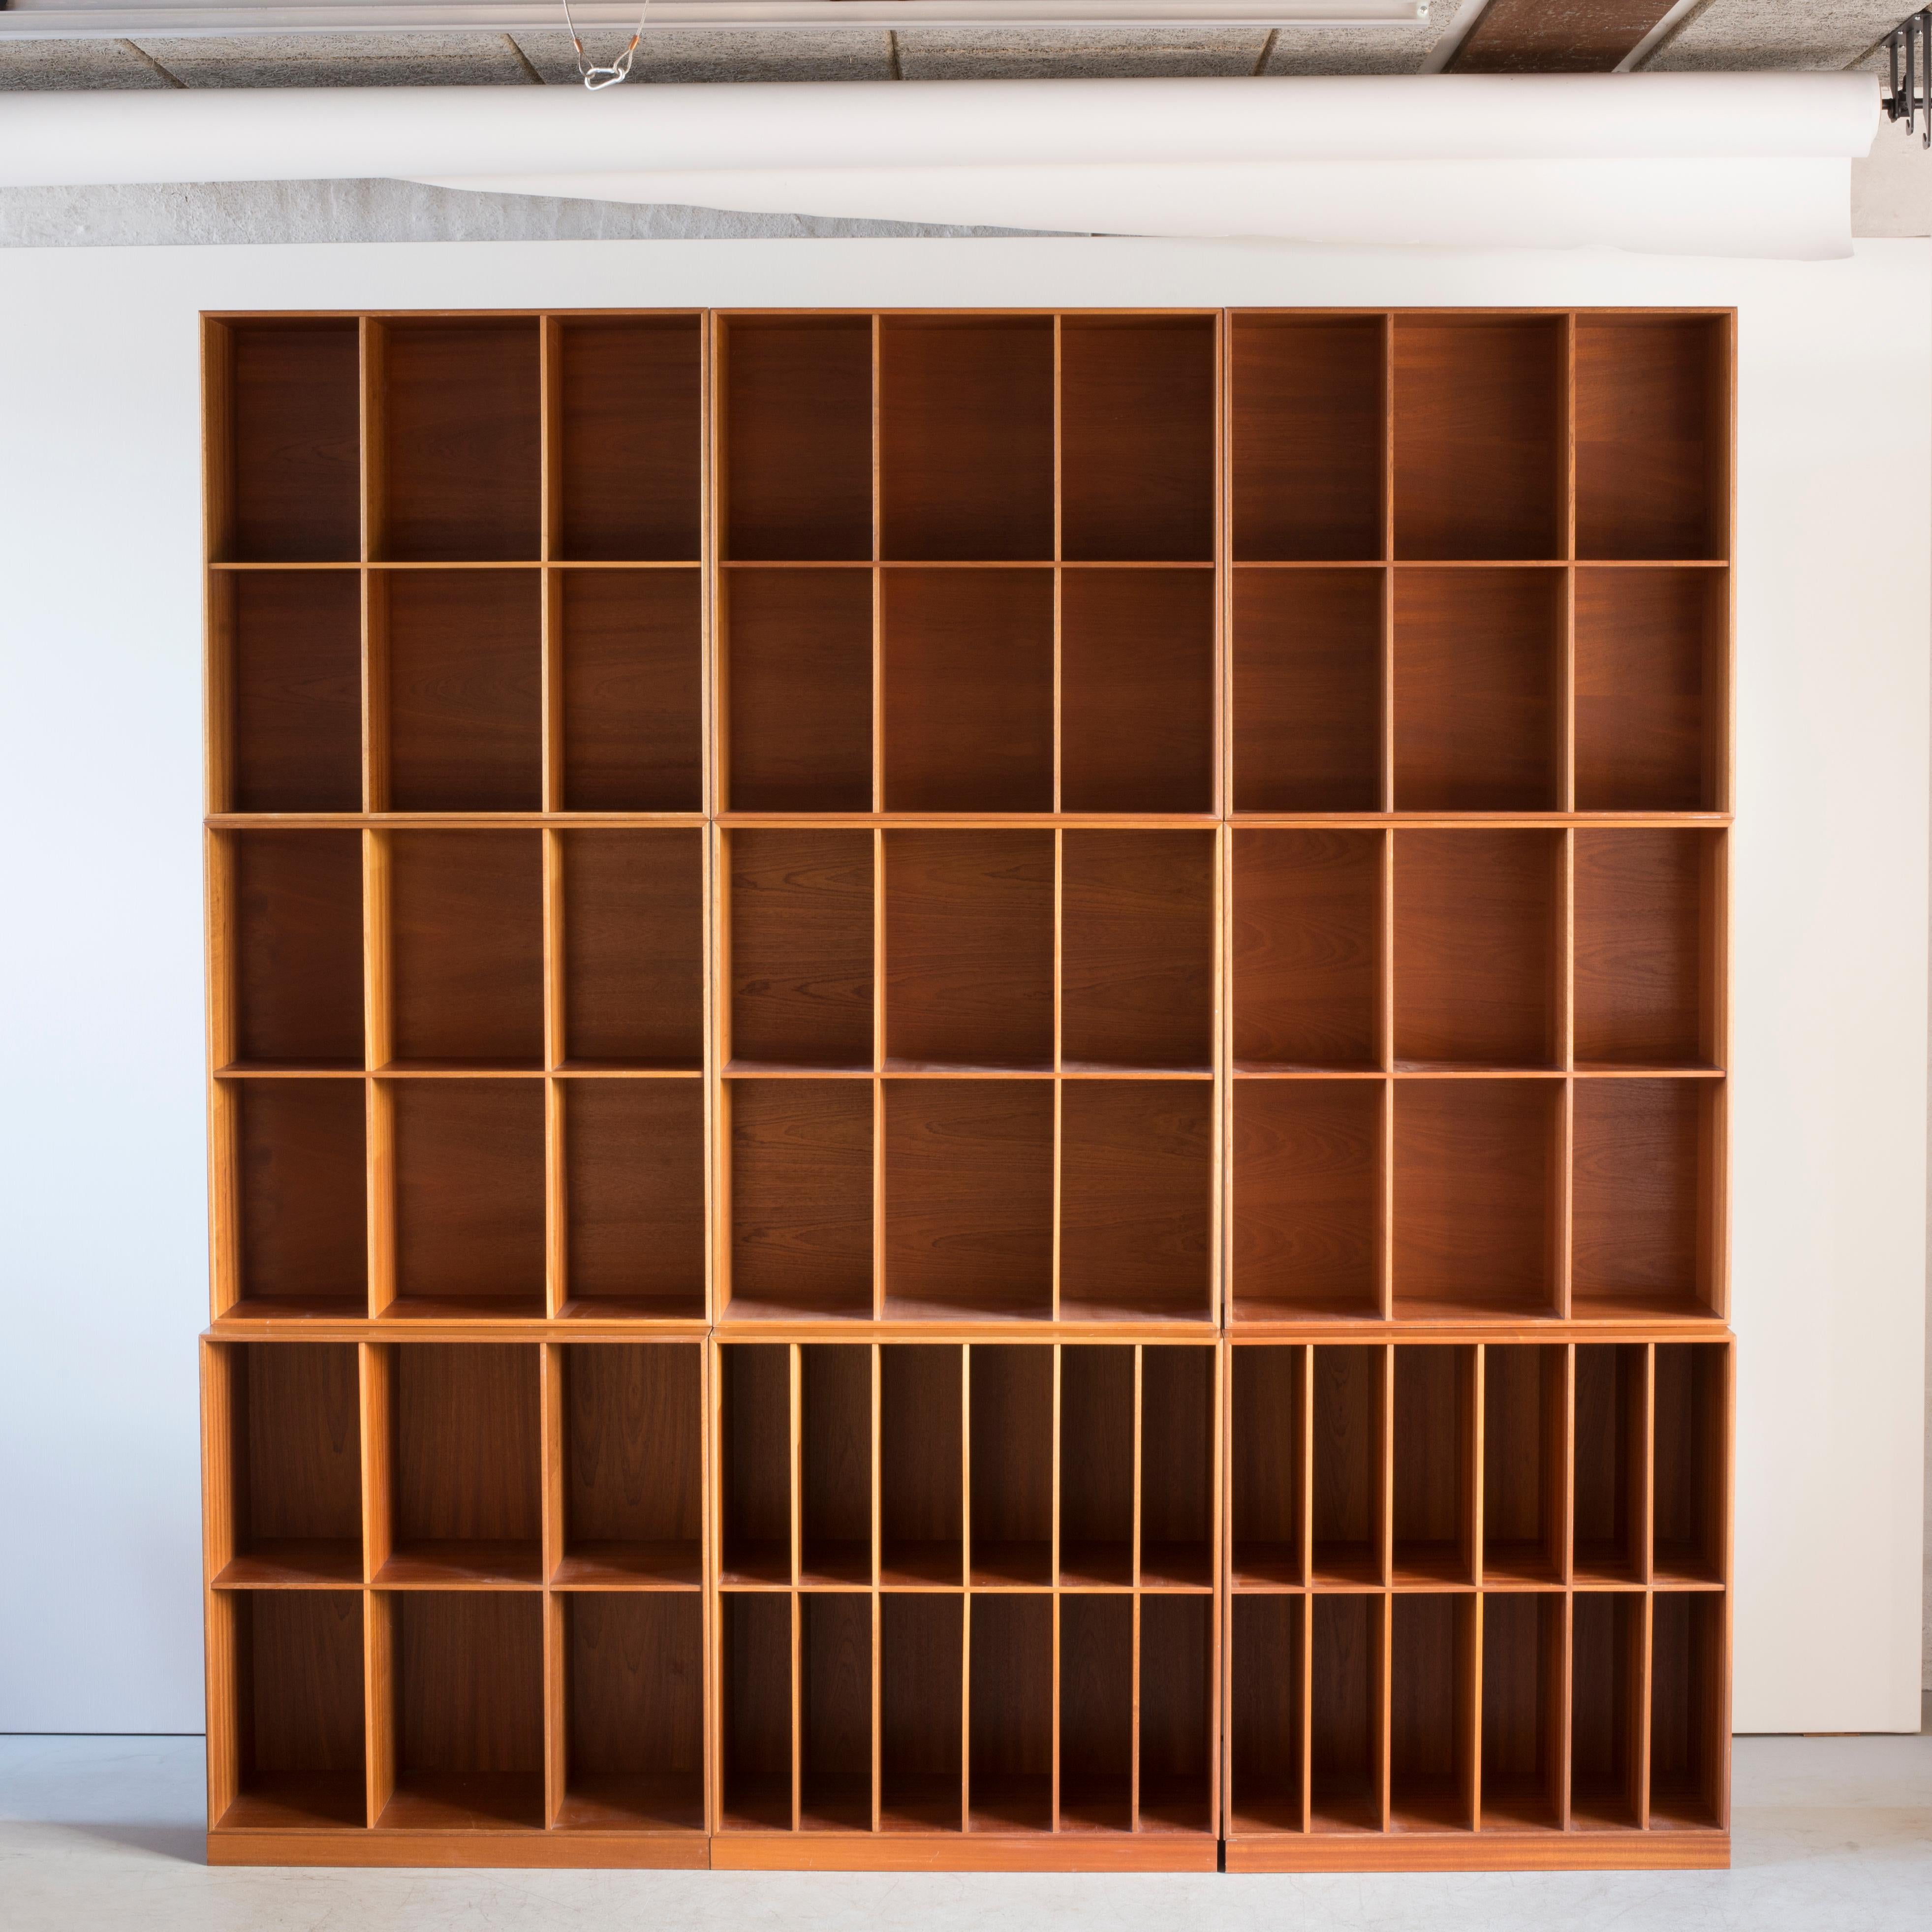 Mogens Koch wall unit of mahogany. Two bookcases with removable inlays. Executed by Rud Rasmussen.

Reverse with paper labels ‘RUD. RASMUSSENS/SNEDKERIER/KØBENHAVN/DENMARK.